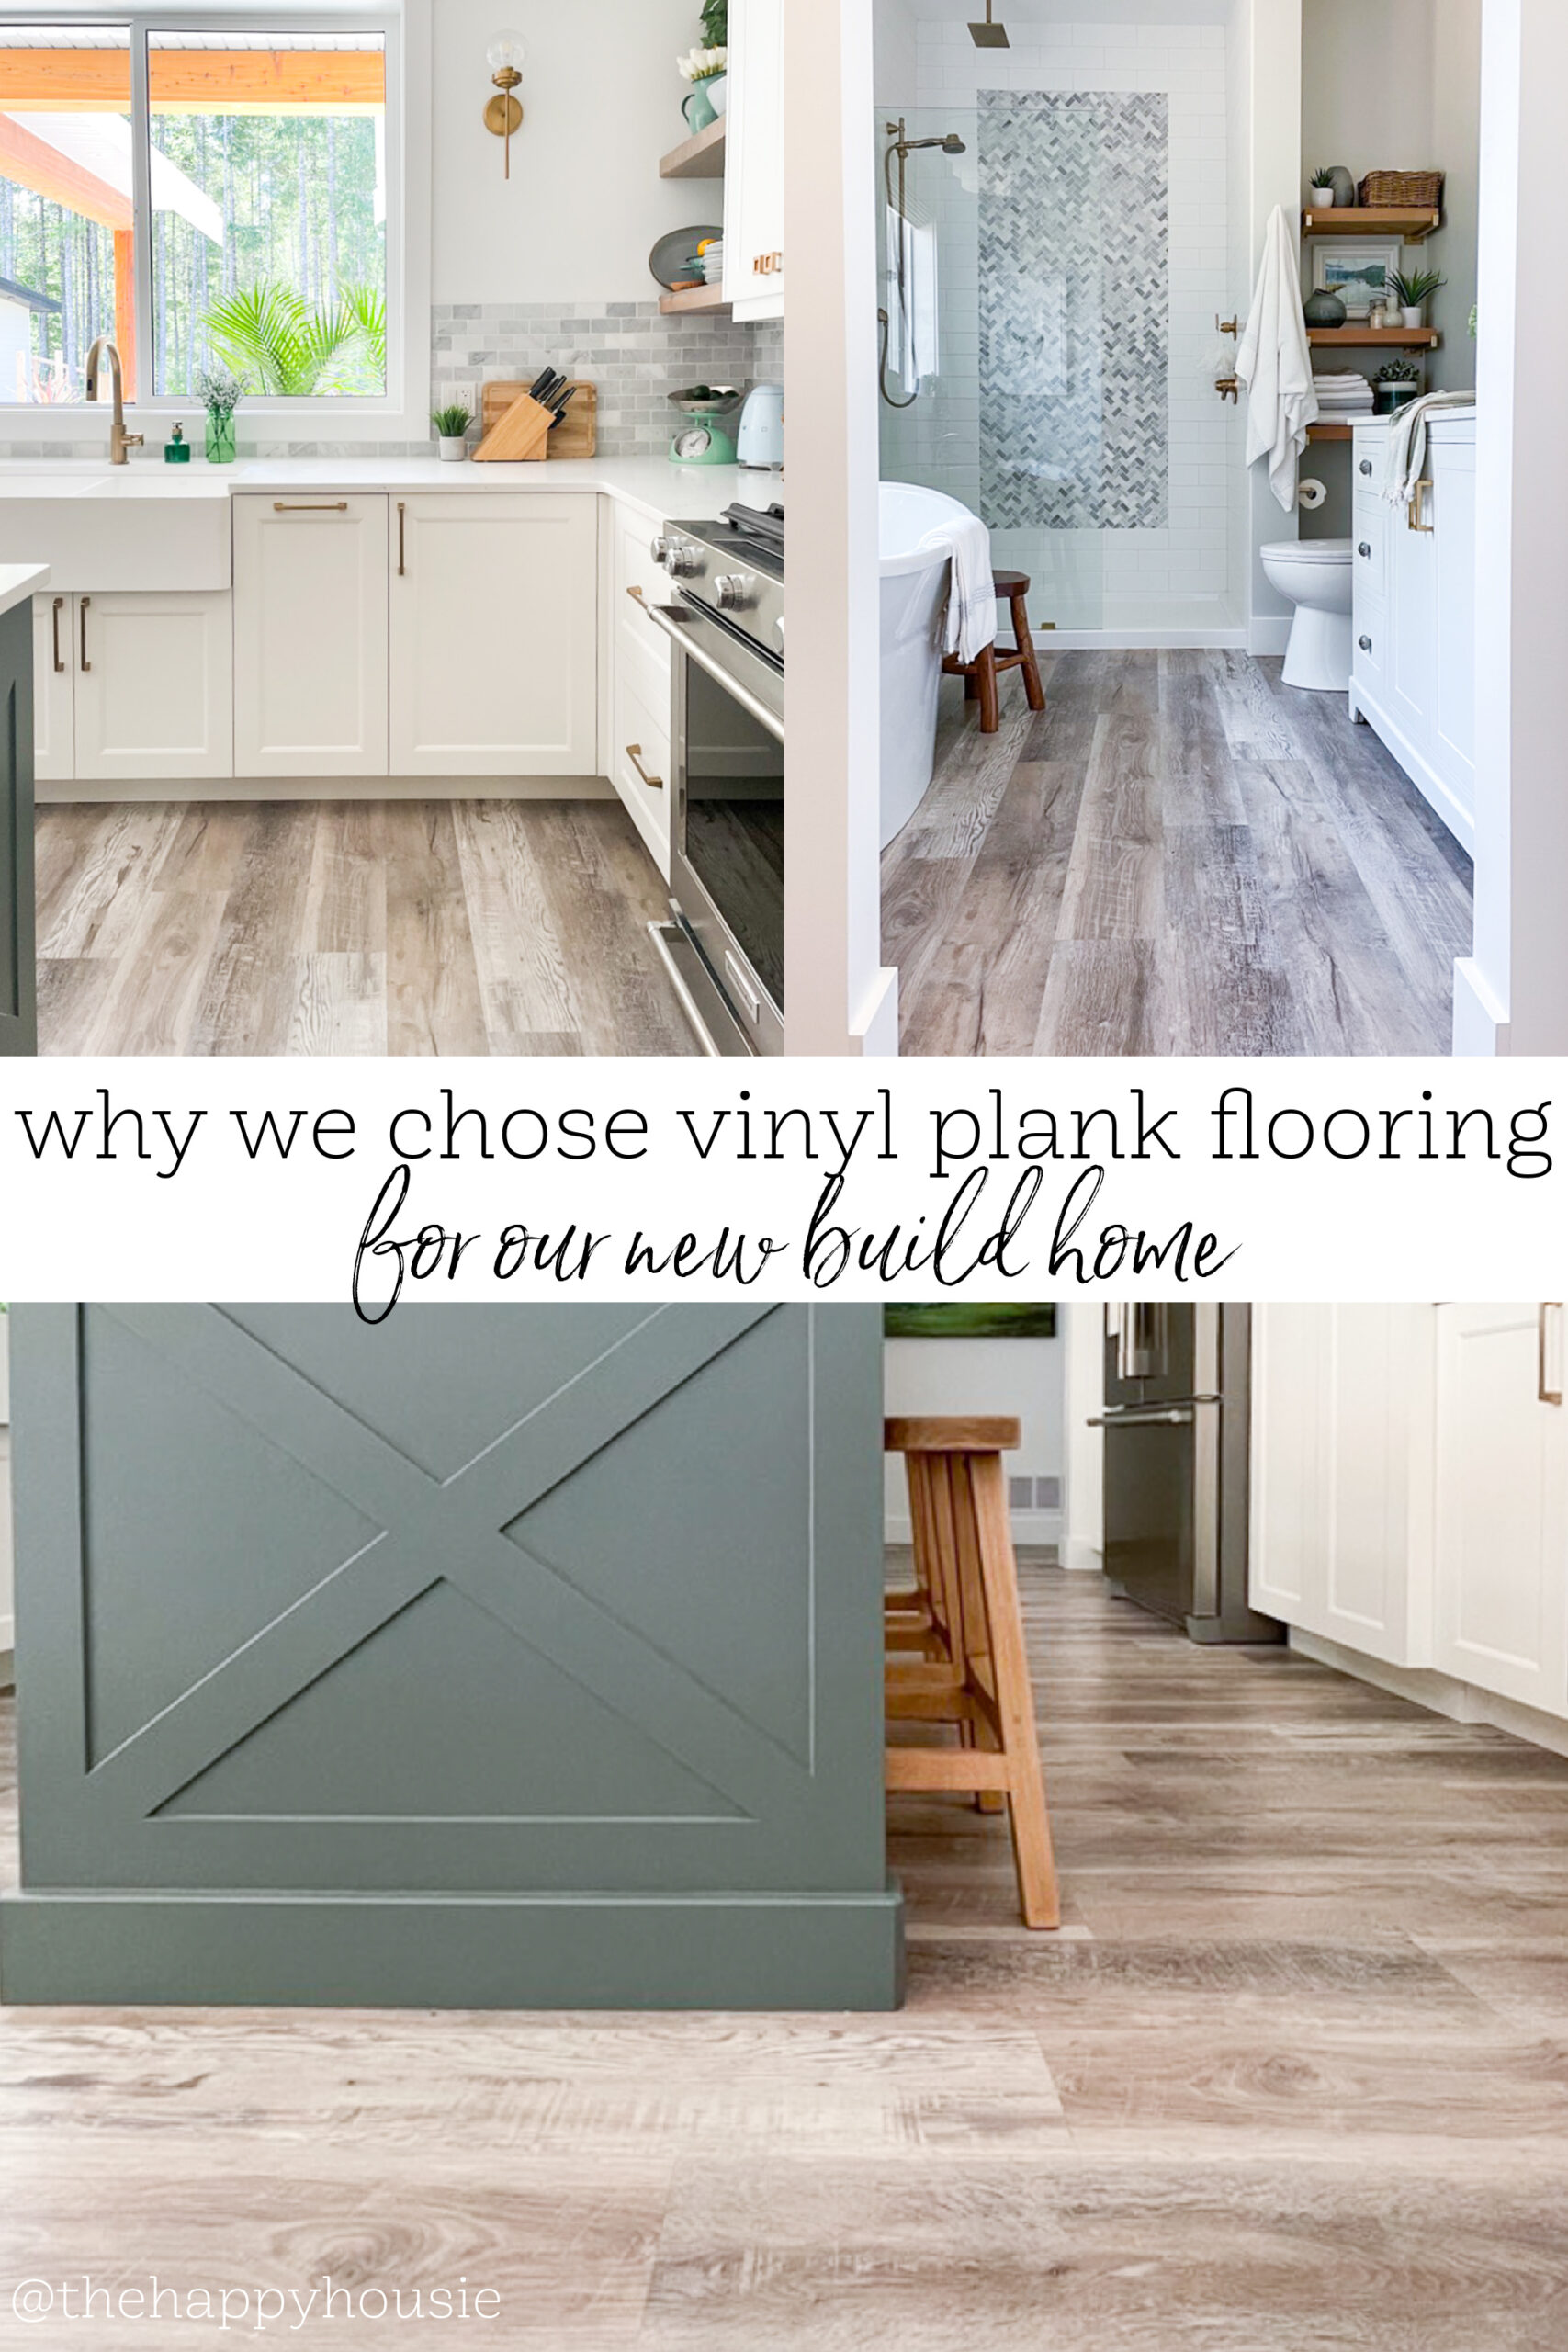 Collage image showing a kitchen and bathroom featuring vinyl plank floors